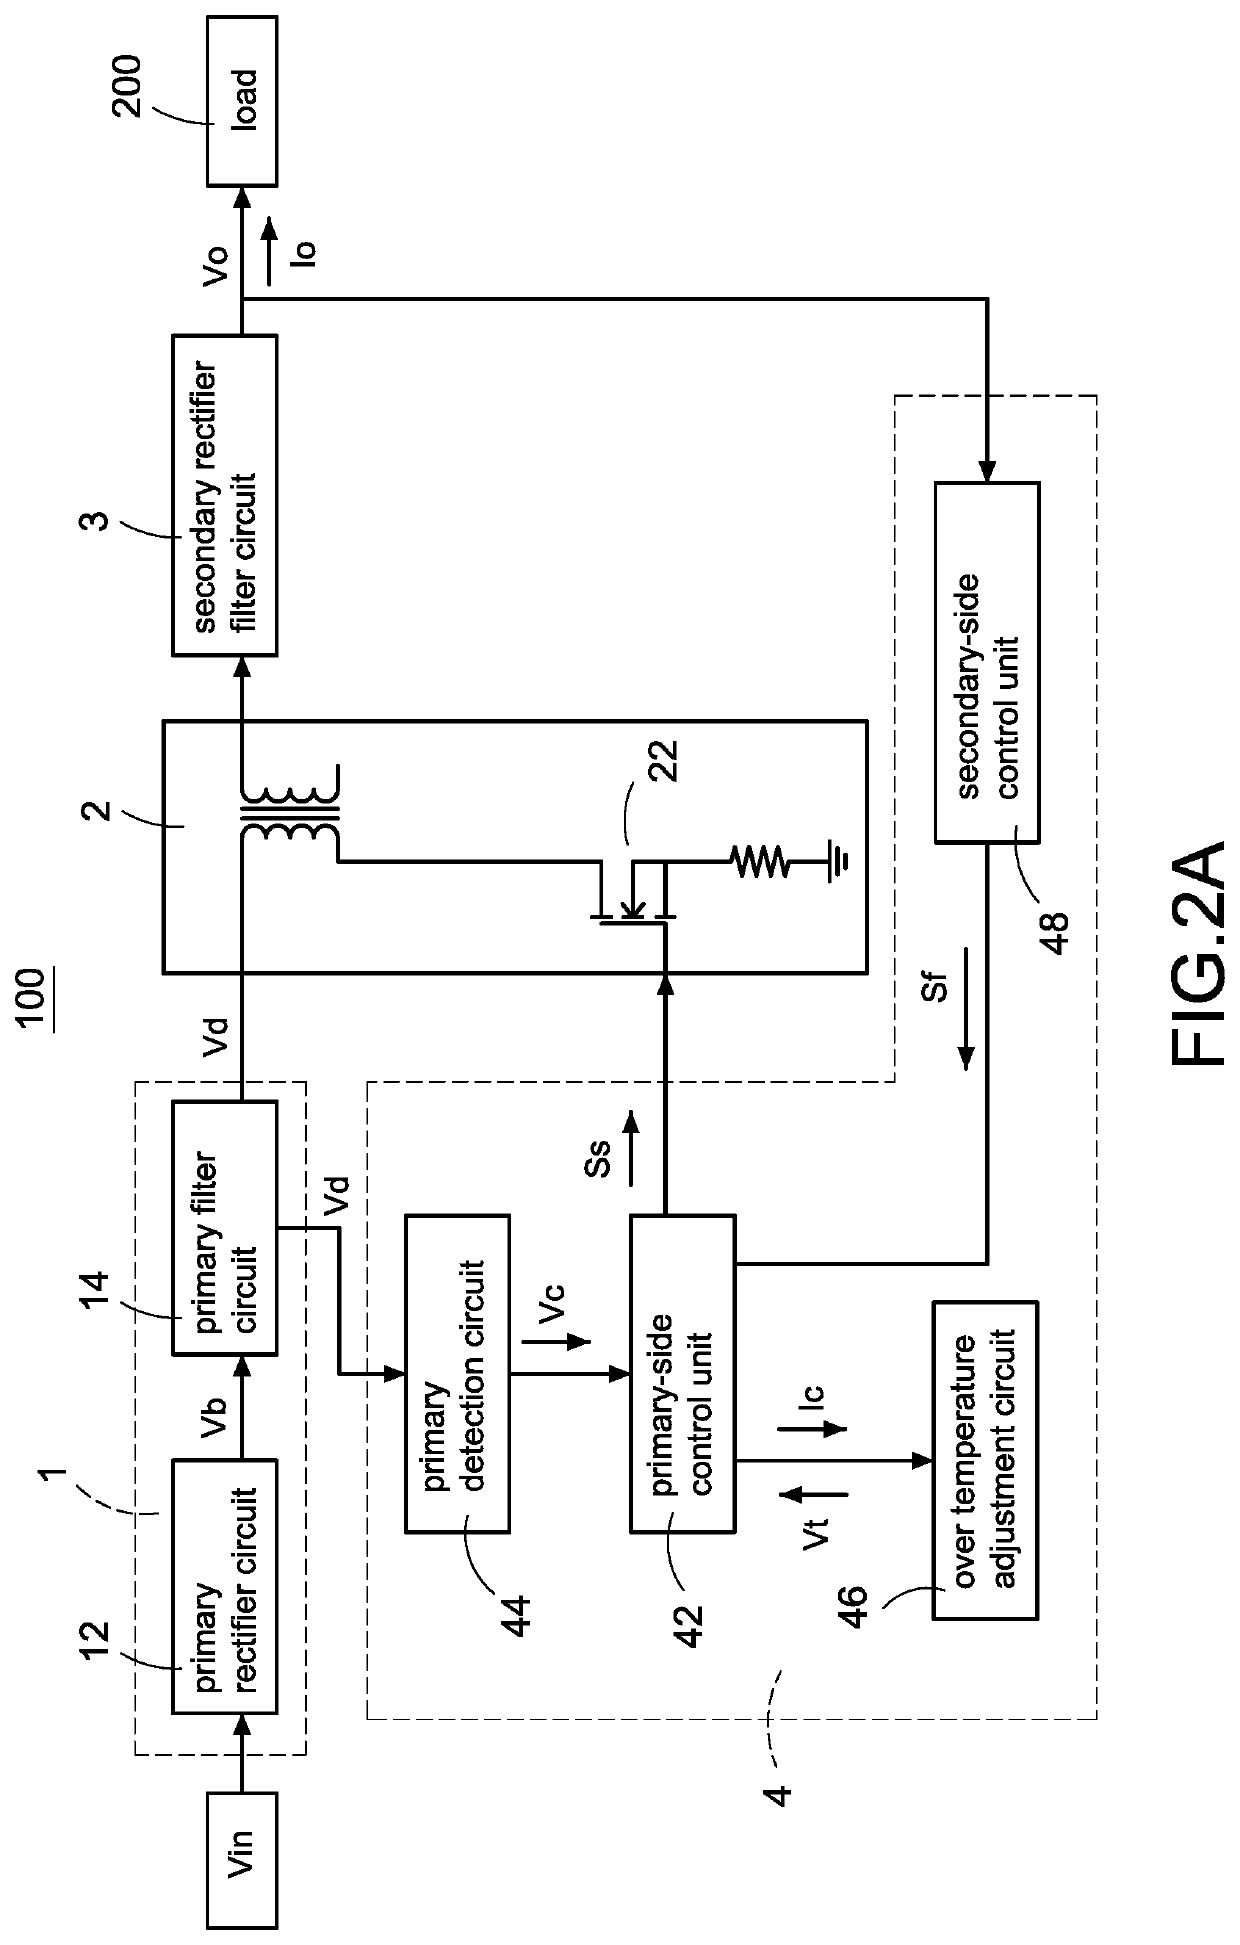 Power converter with over temperature protection compensation